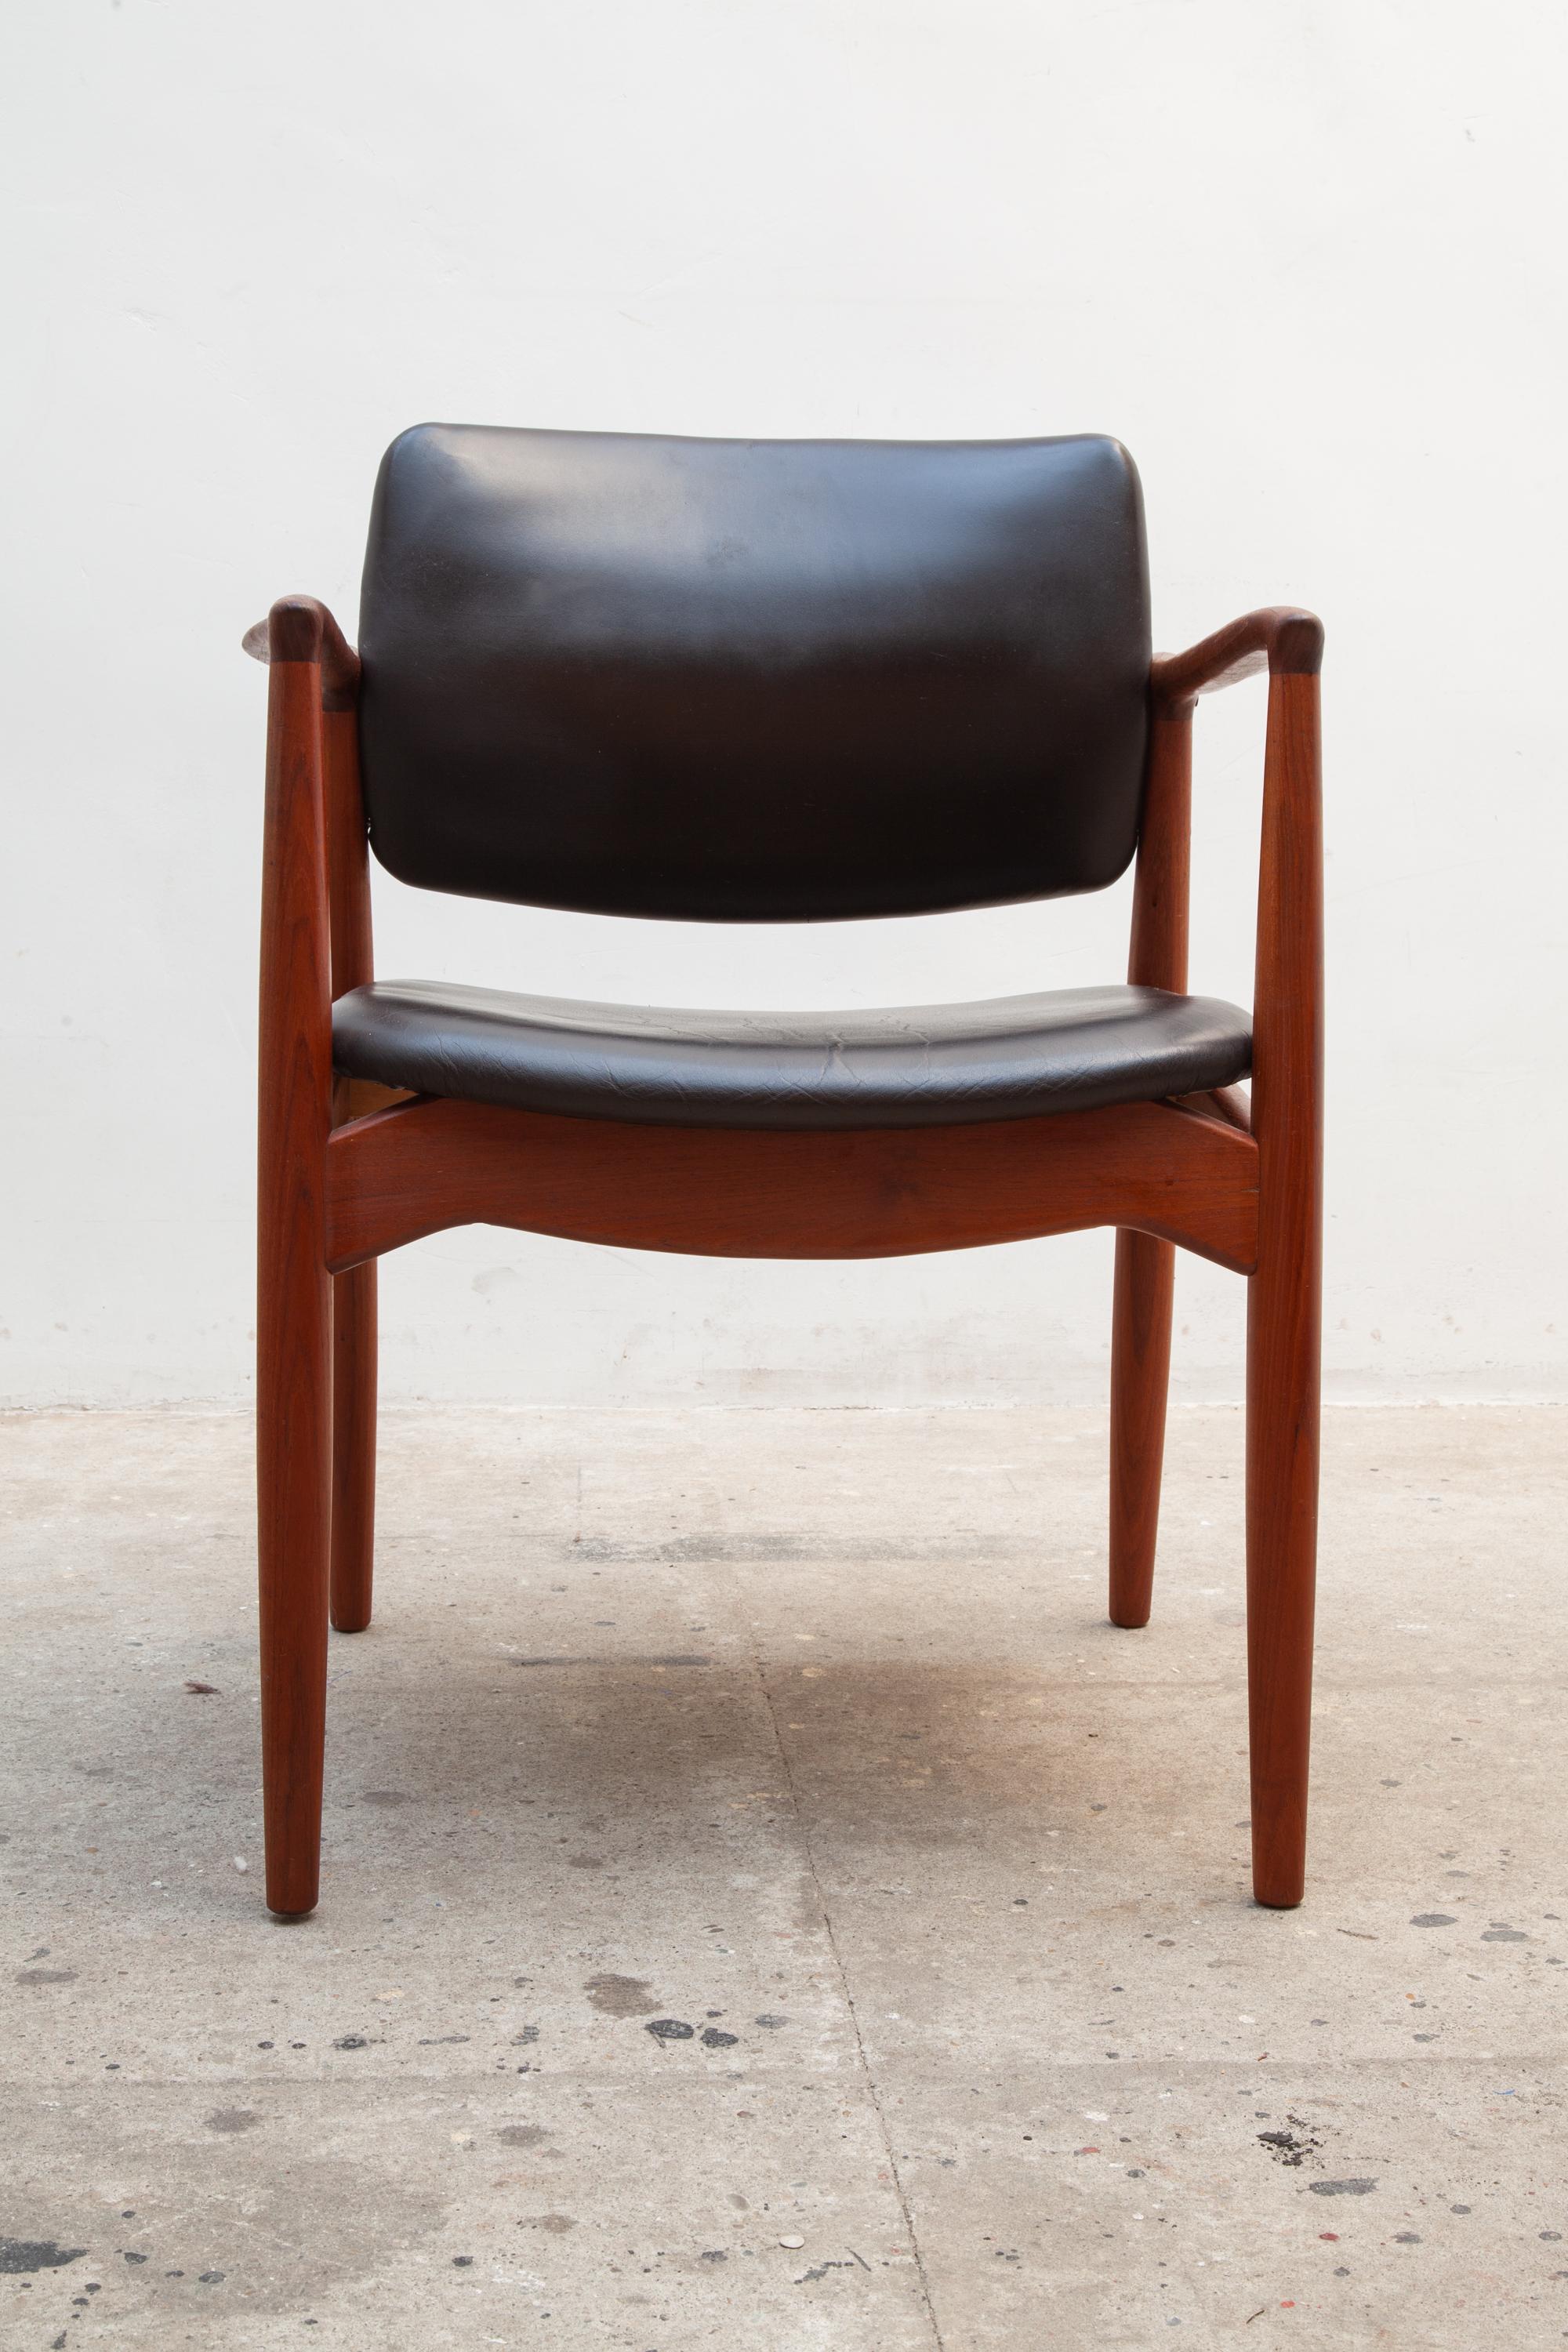 A lovely side chair or desk chair in beautiful Scandinavian design attributed design by Arne Vodder 1950s. Made with a very nice eye for quality, this elegant chair has a high-quality teak wooden frame in a warm brown color. The armrests have a